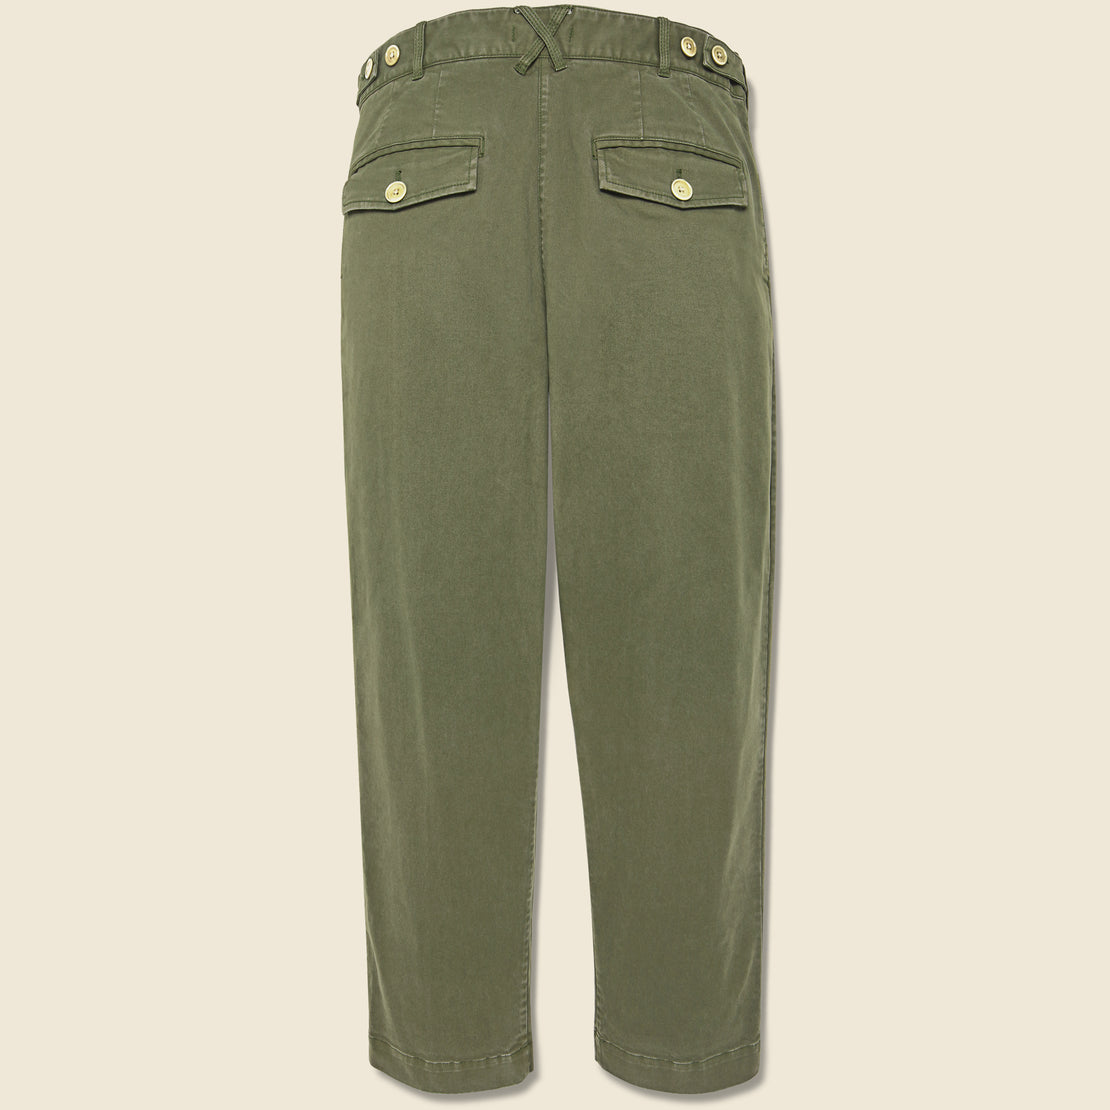 Flat Front Chino - Military Olive - Alex Mill - STAG Provisions - Pants - Twill